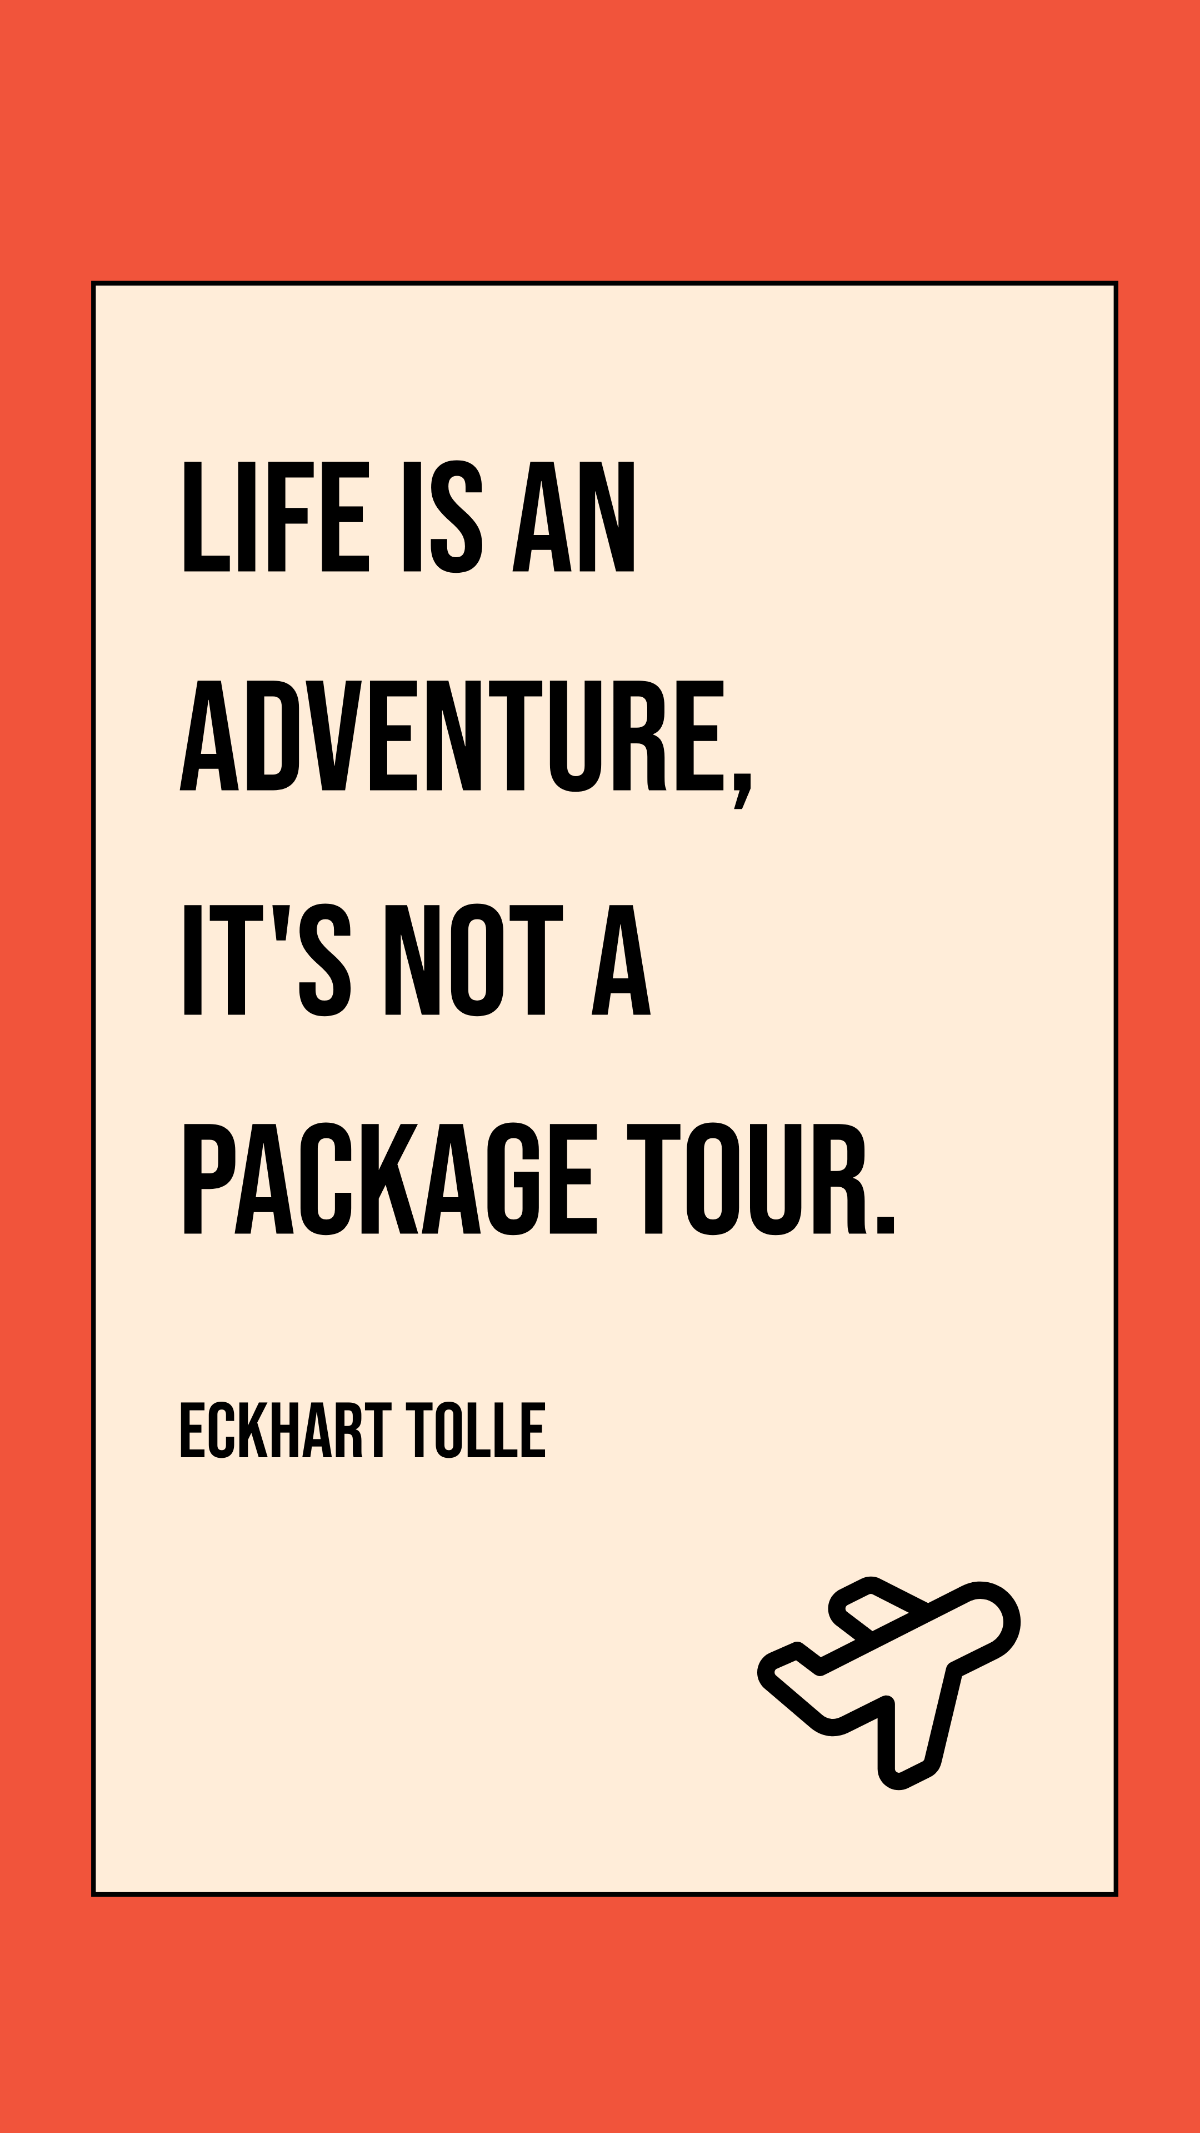 Eckhart Tolle -Life is an adventure, it's not a package tour. Template